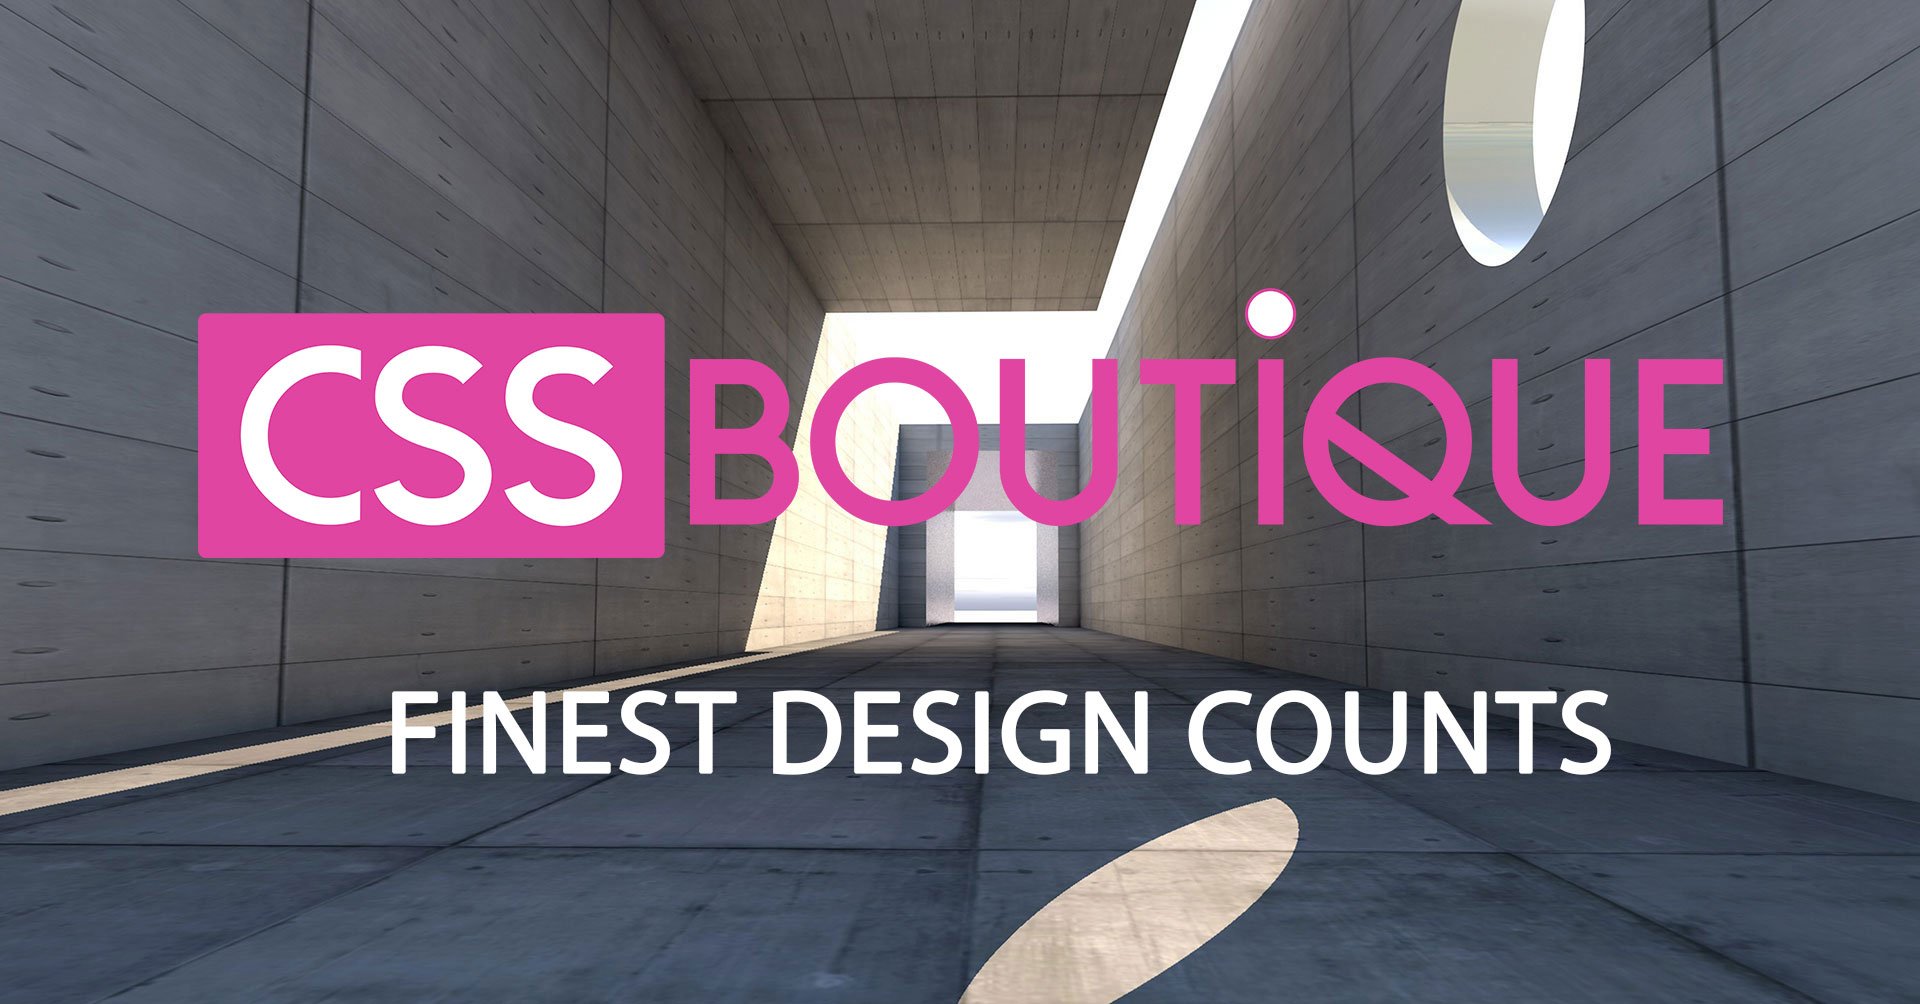 Thumbnail Css Boutique Best Websites Around The World